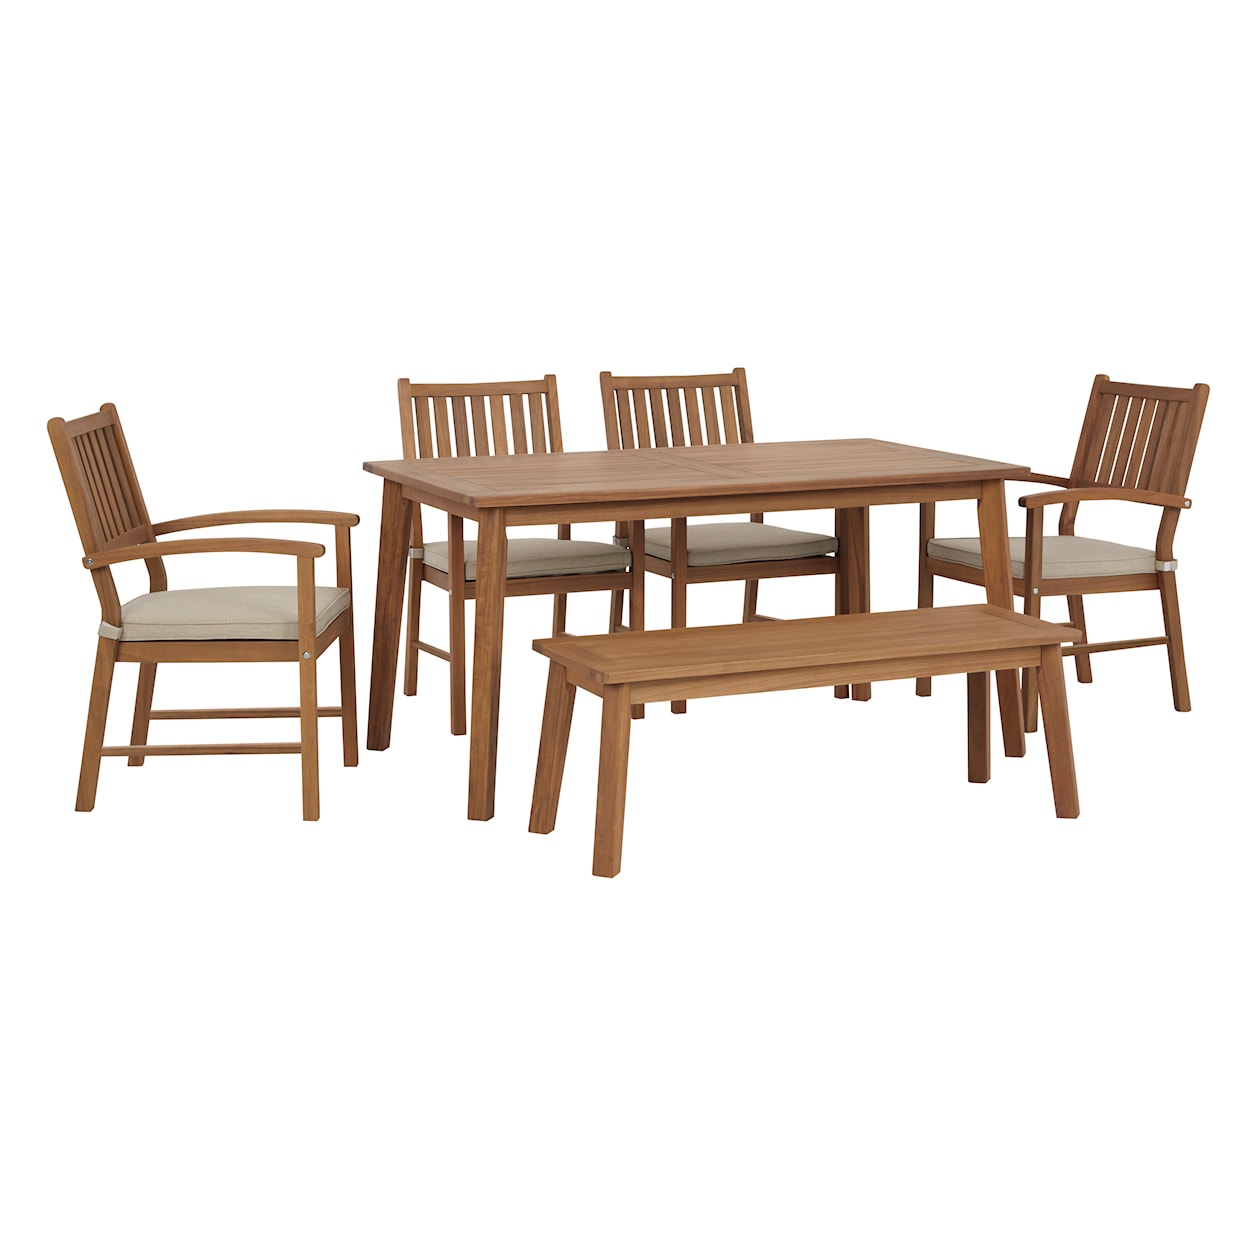 Ashley Signature Design Janiyah Outdoor Dining Table w/ 4 Chairs & Bench